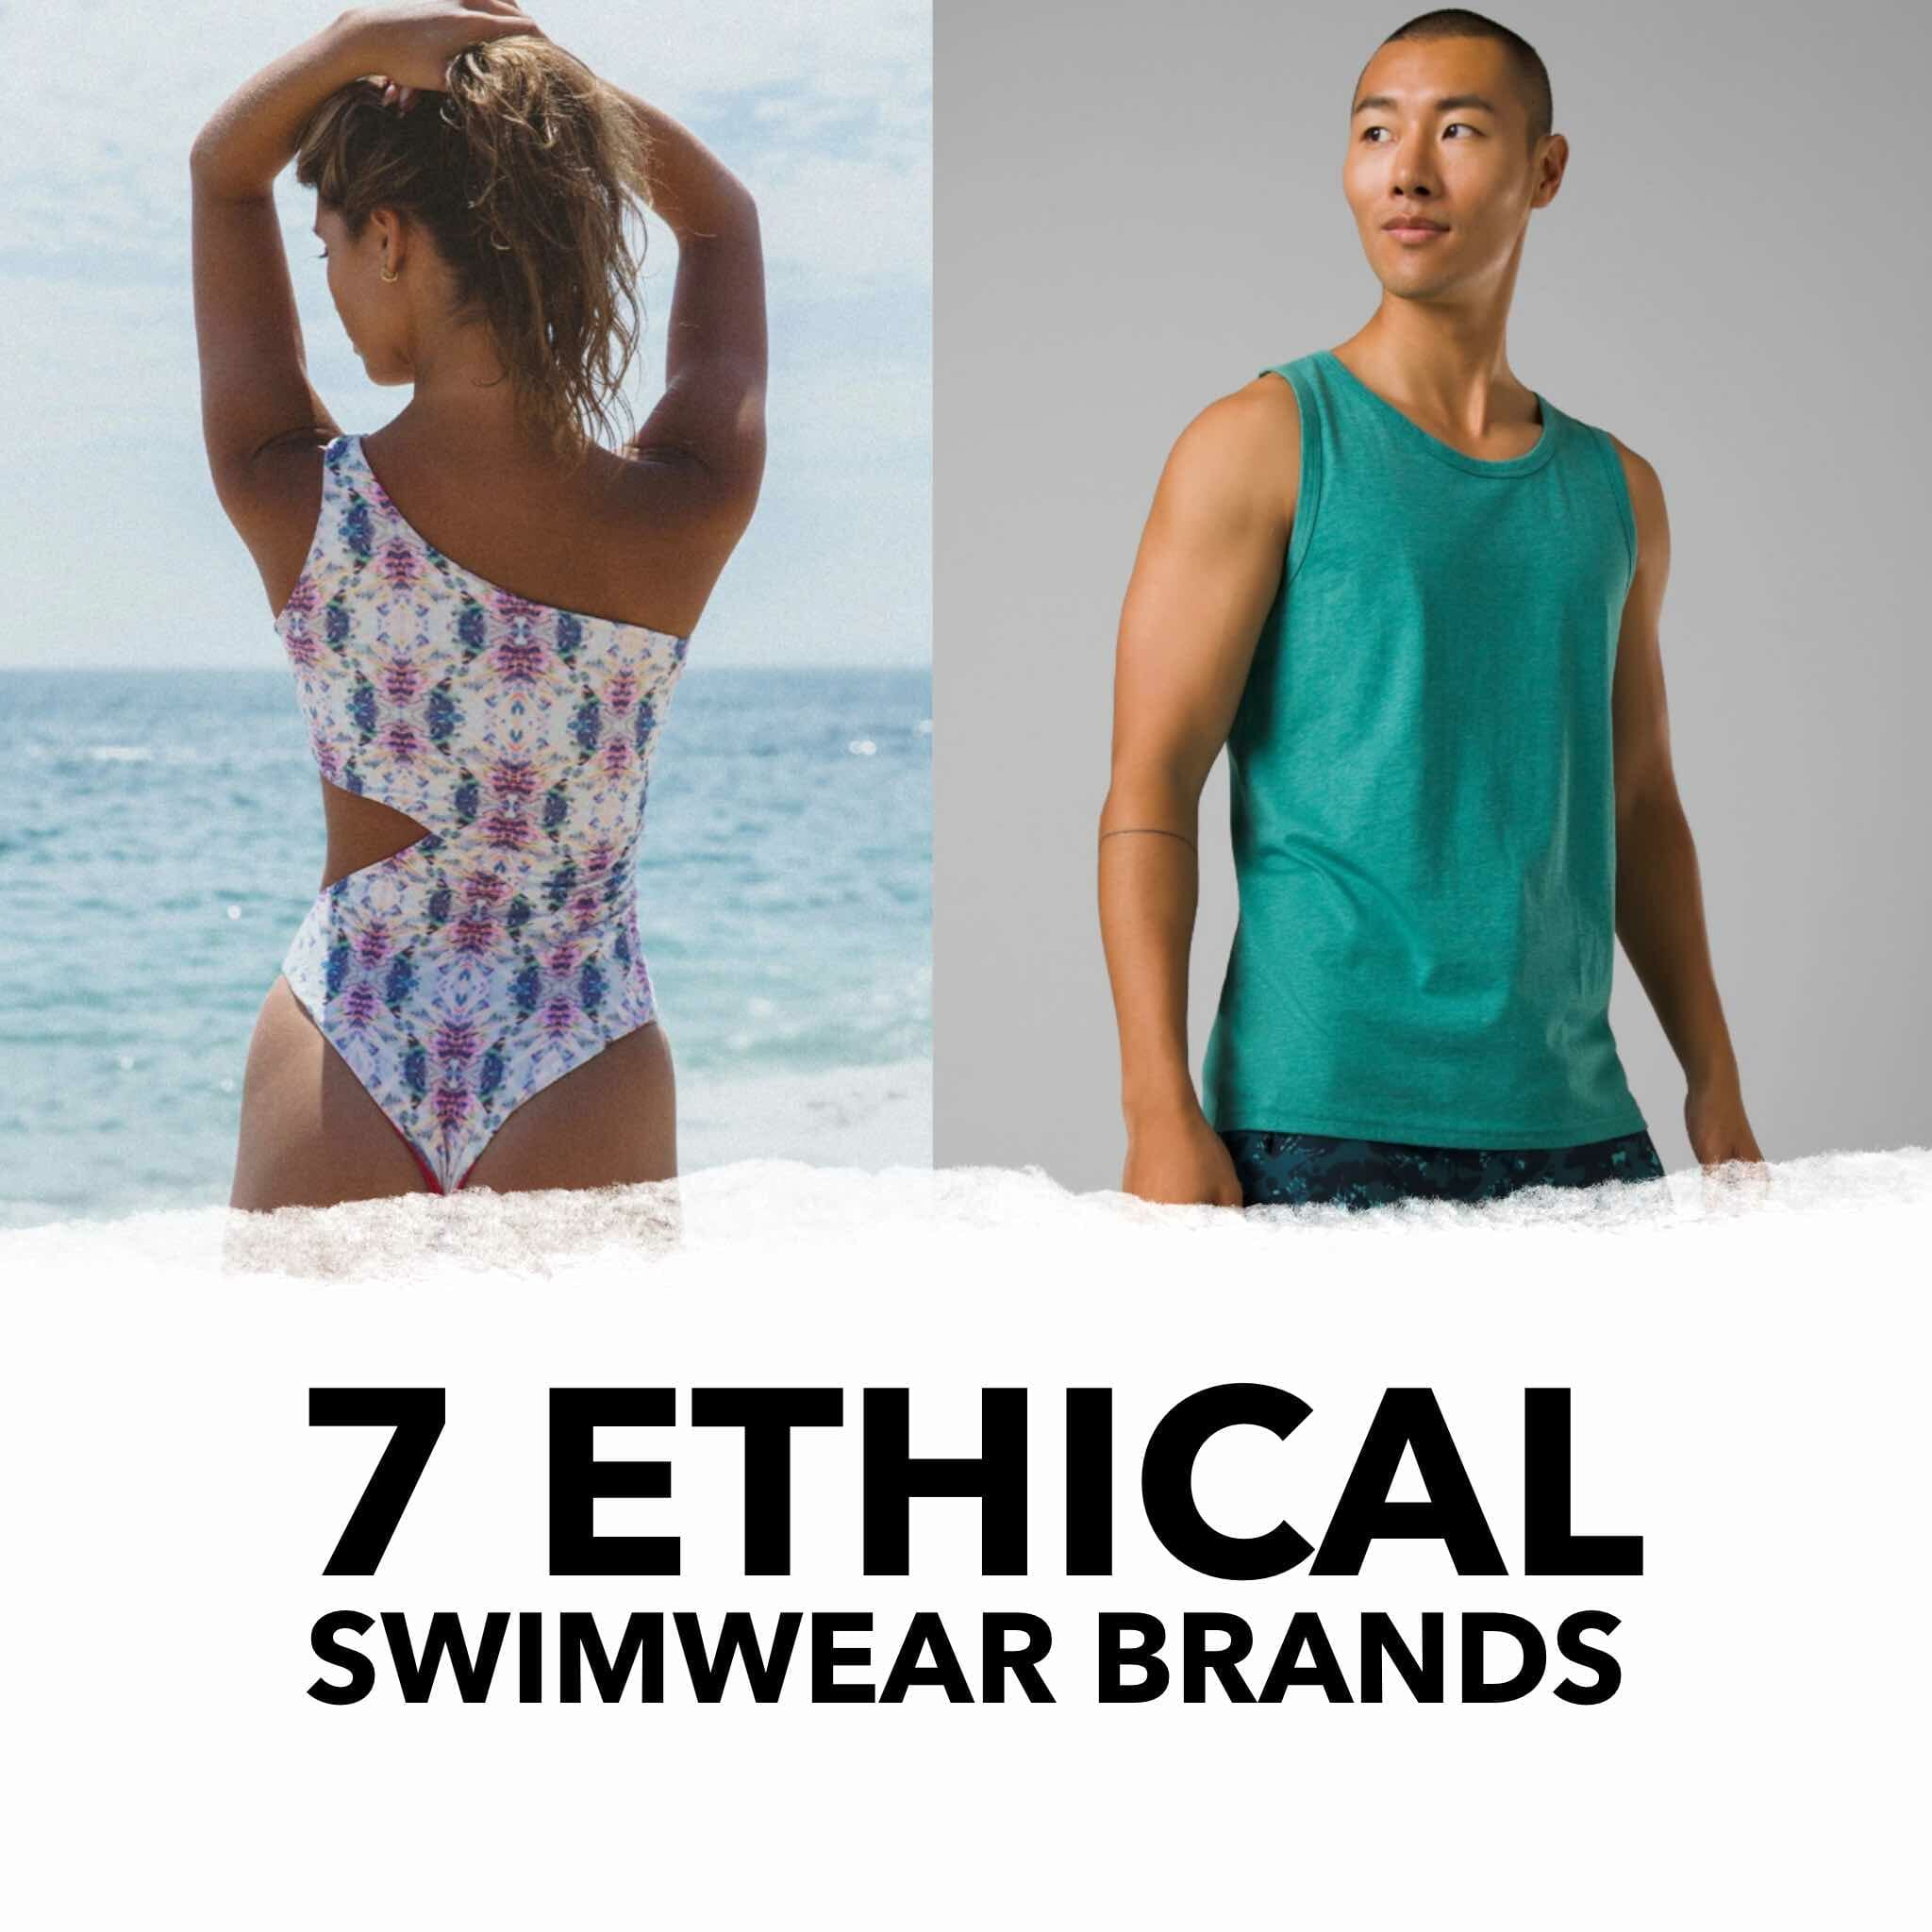 7 ethical swimsuit brands